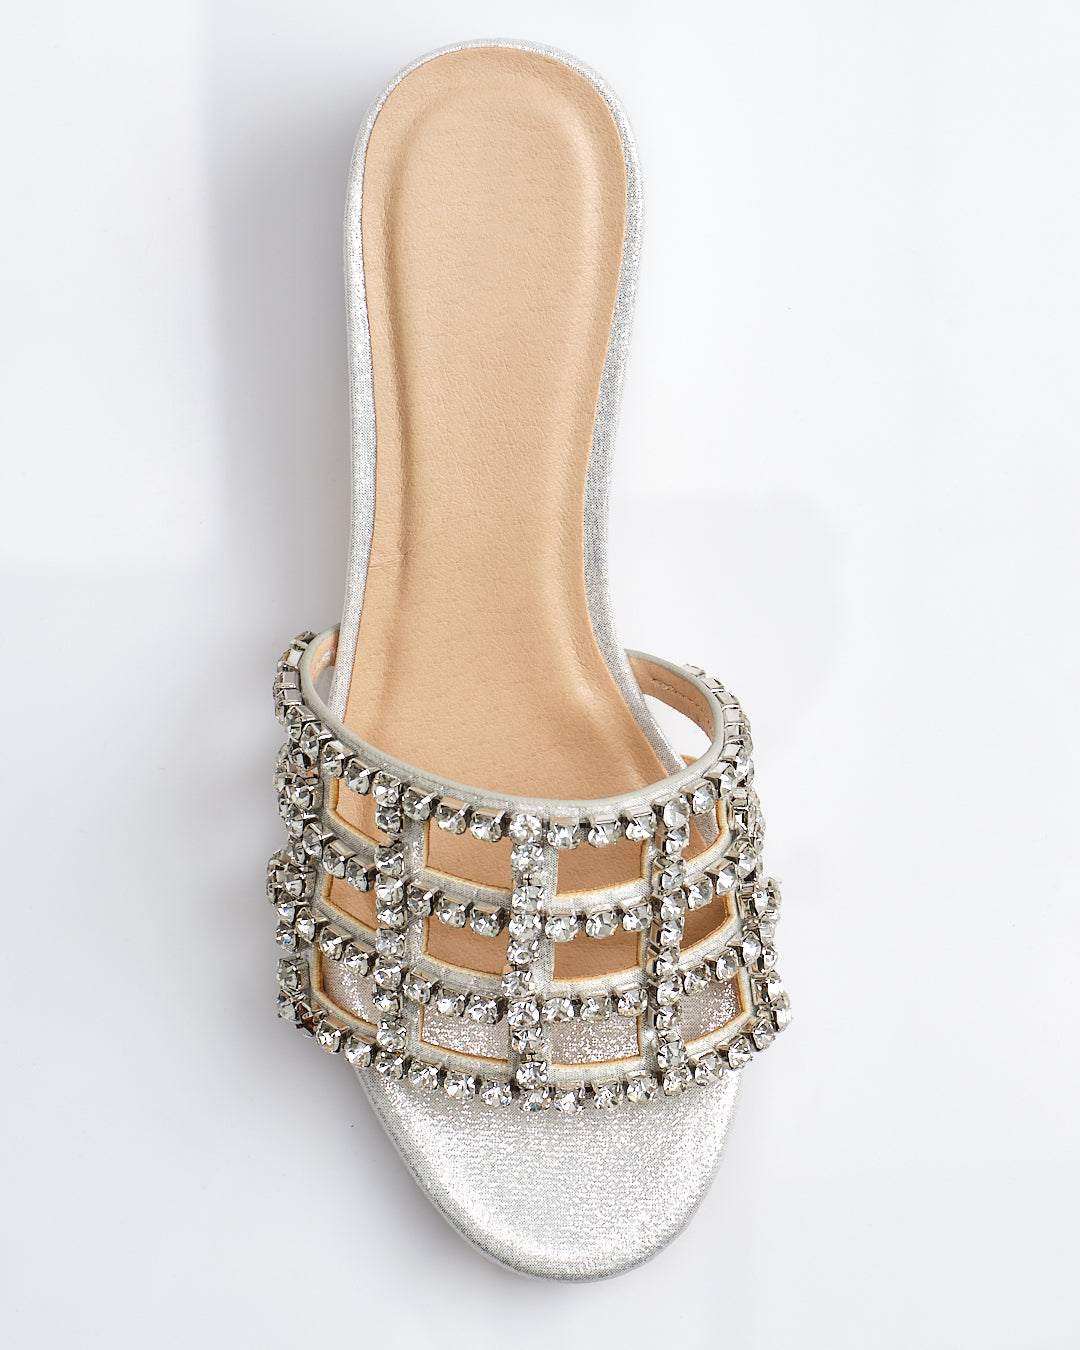 Low Heels Encrusted with Crystals